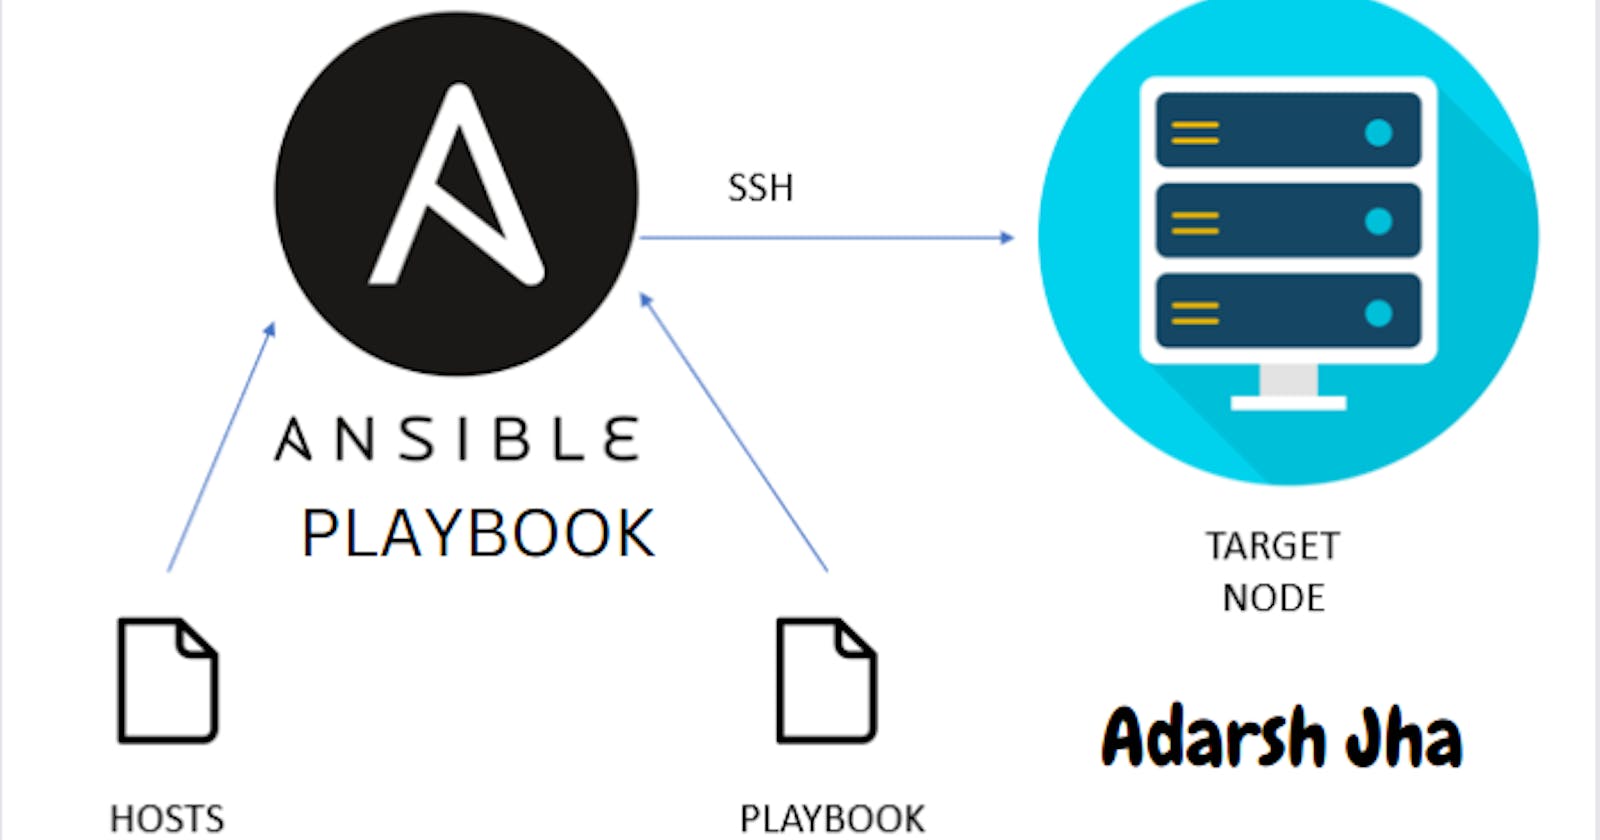 🚀📅 Day 47 DevOps Challenge - Automating Server Management with Ansible Playbooks 🚀